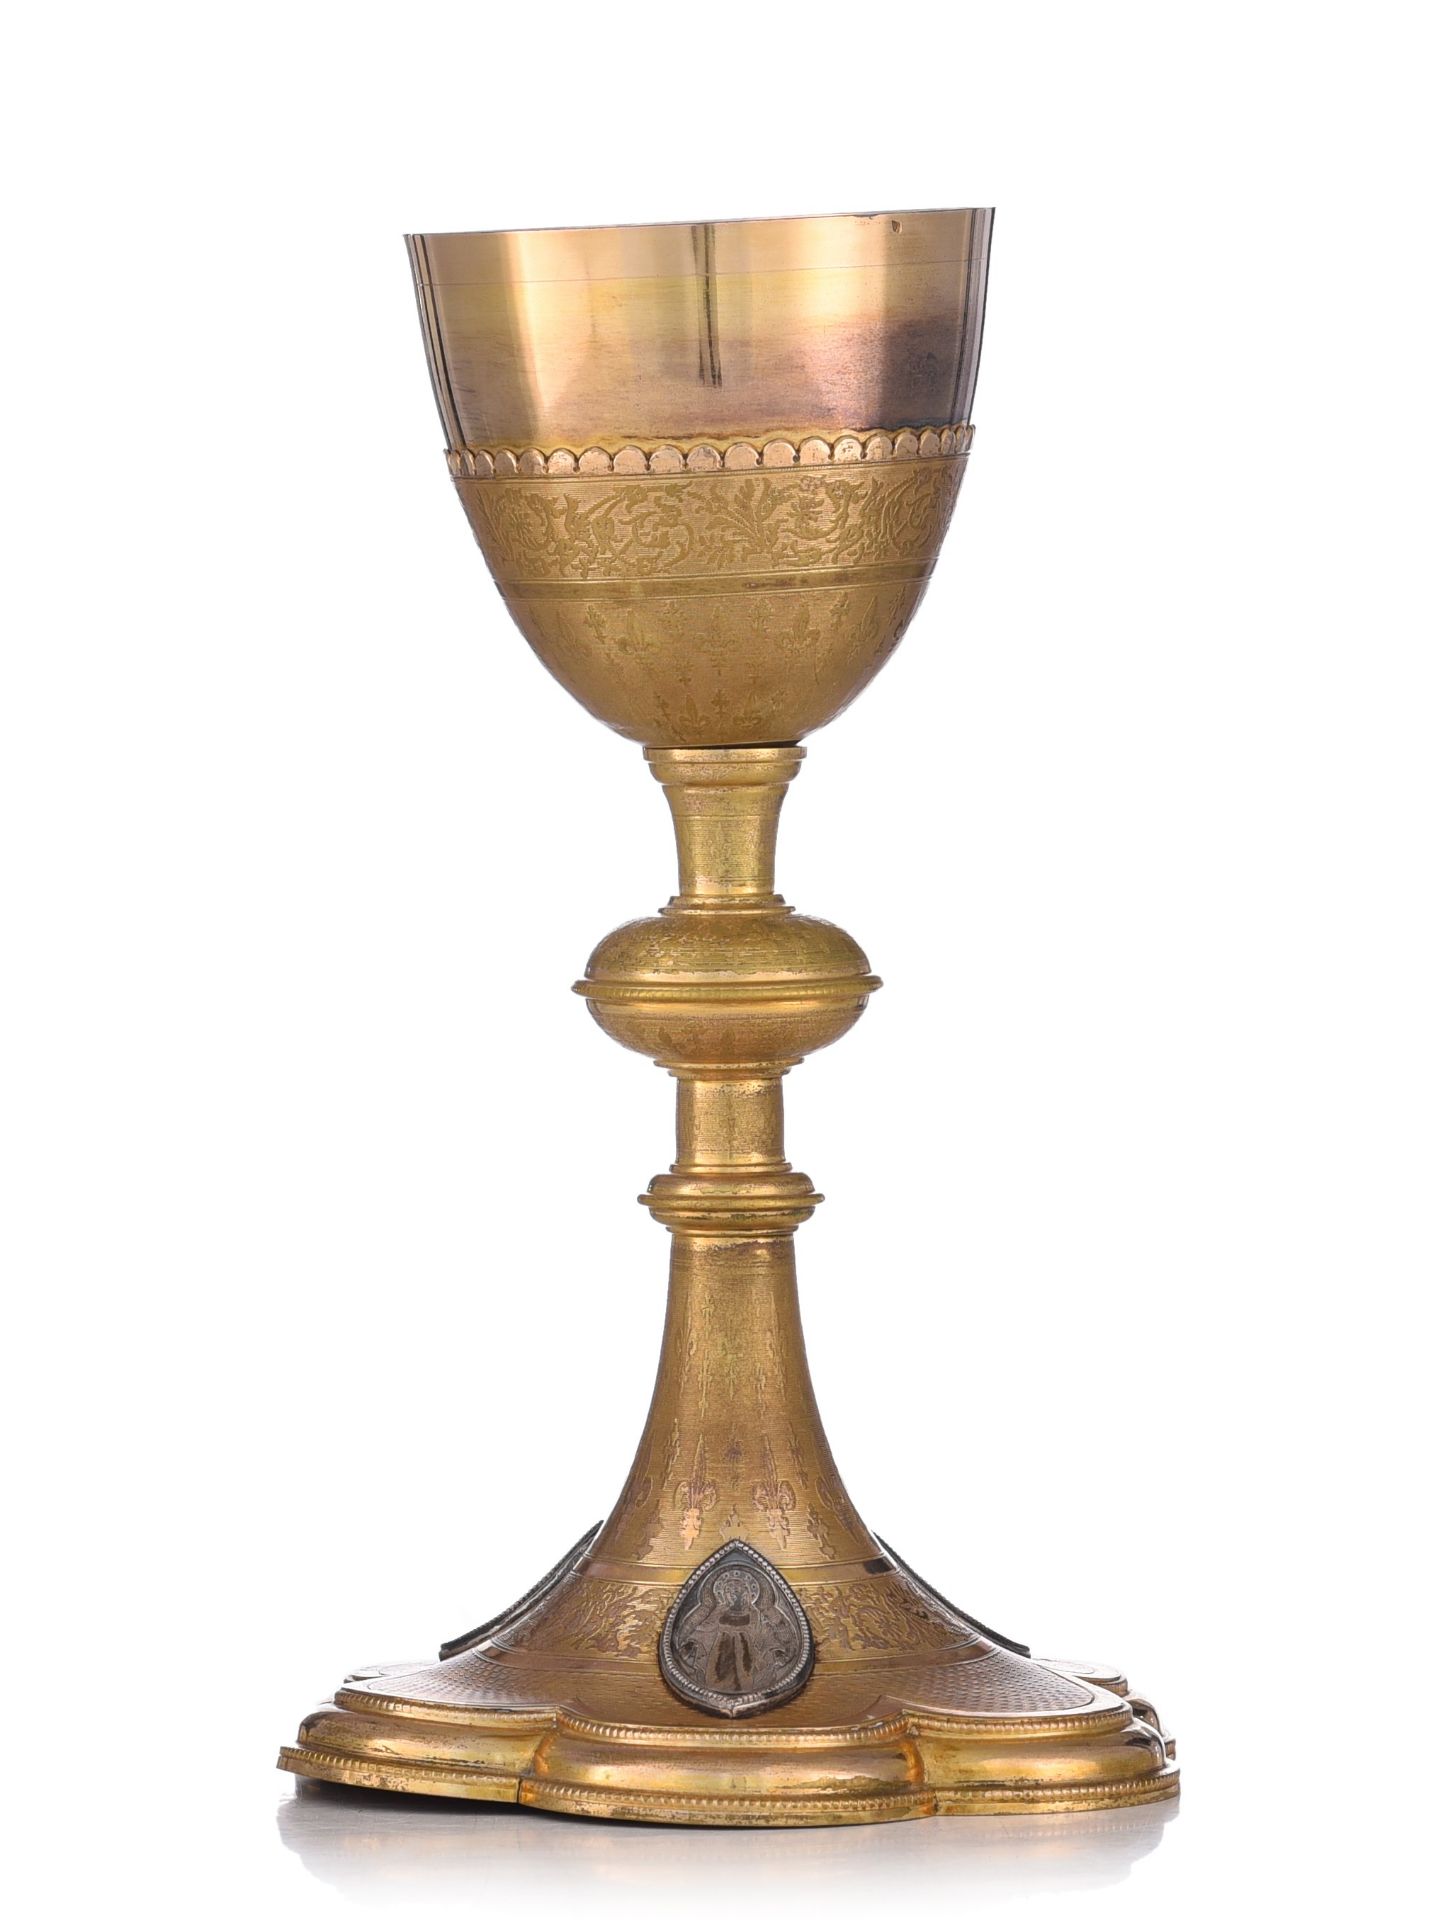 A French export silver and gilt silver chalice decorated with filigree work, H 31 cm - total weight - Image 17 of 24